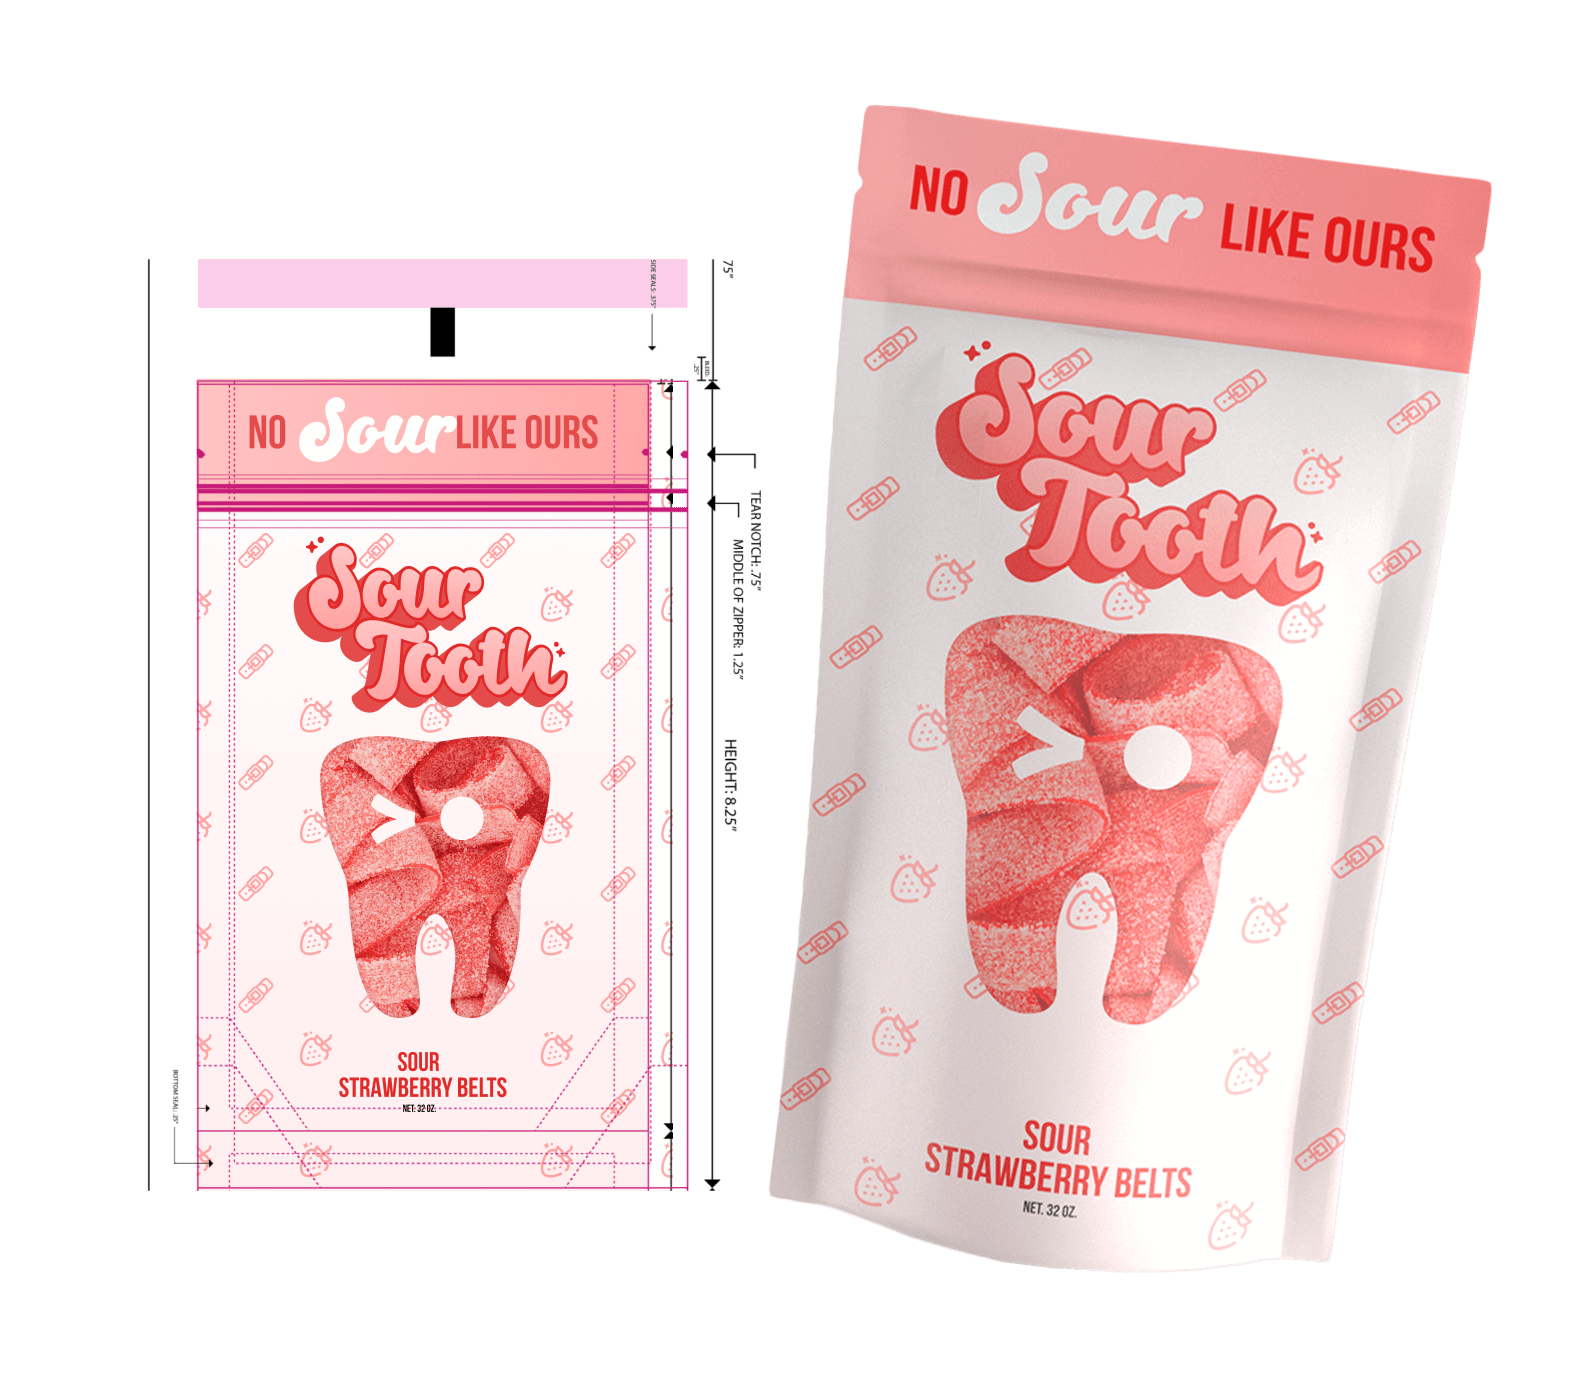 Sour Tooth Branding